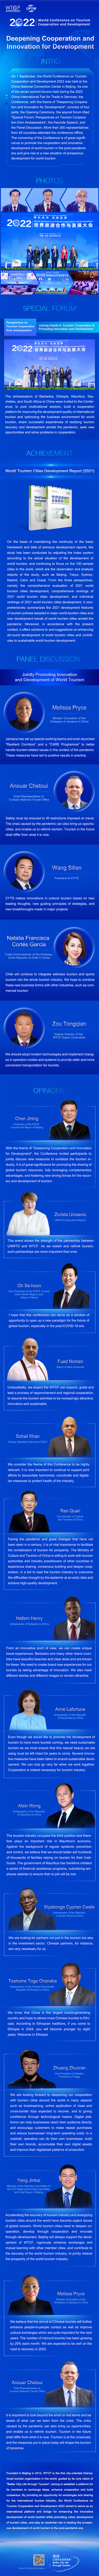 Infographic: World Conference on Tourism Cooperation and Development 2022_fororder_2022联合会长图-英文(2)